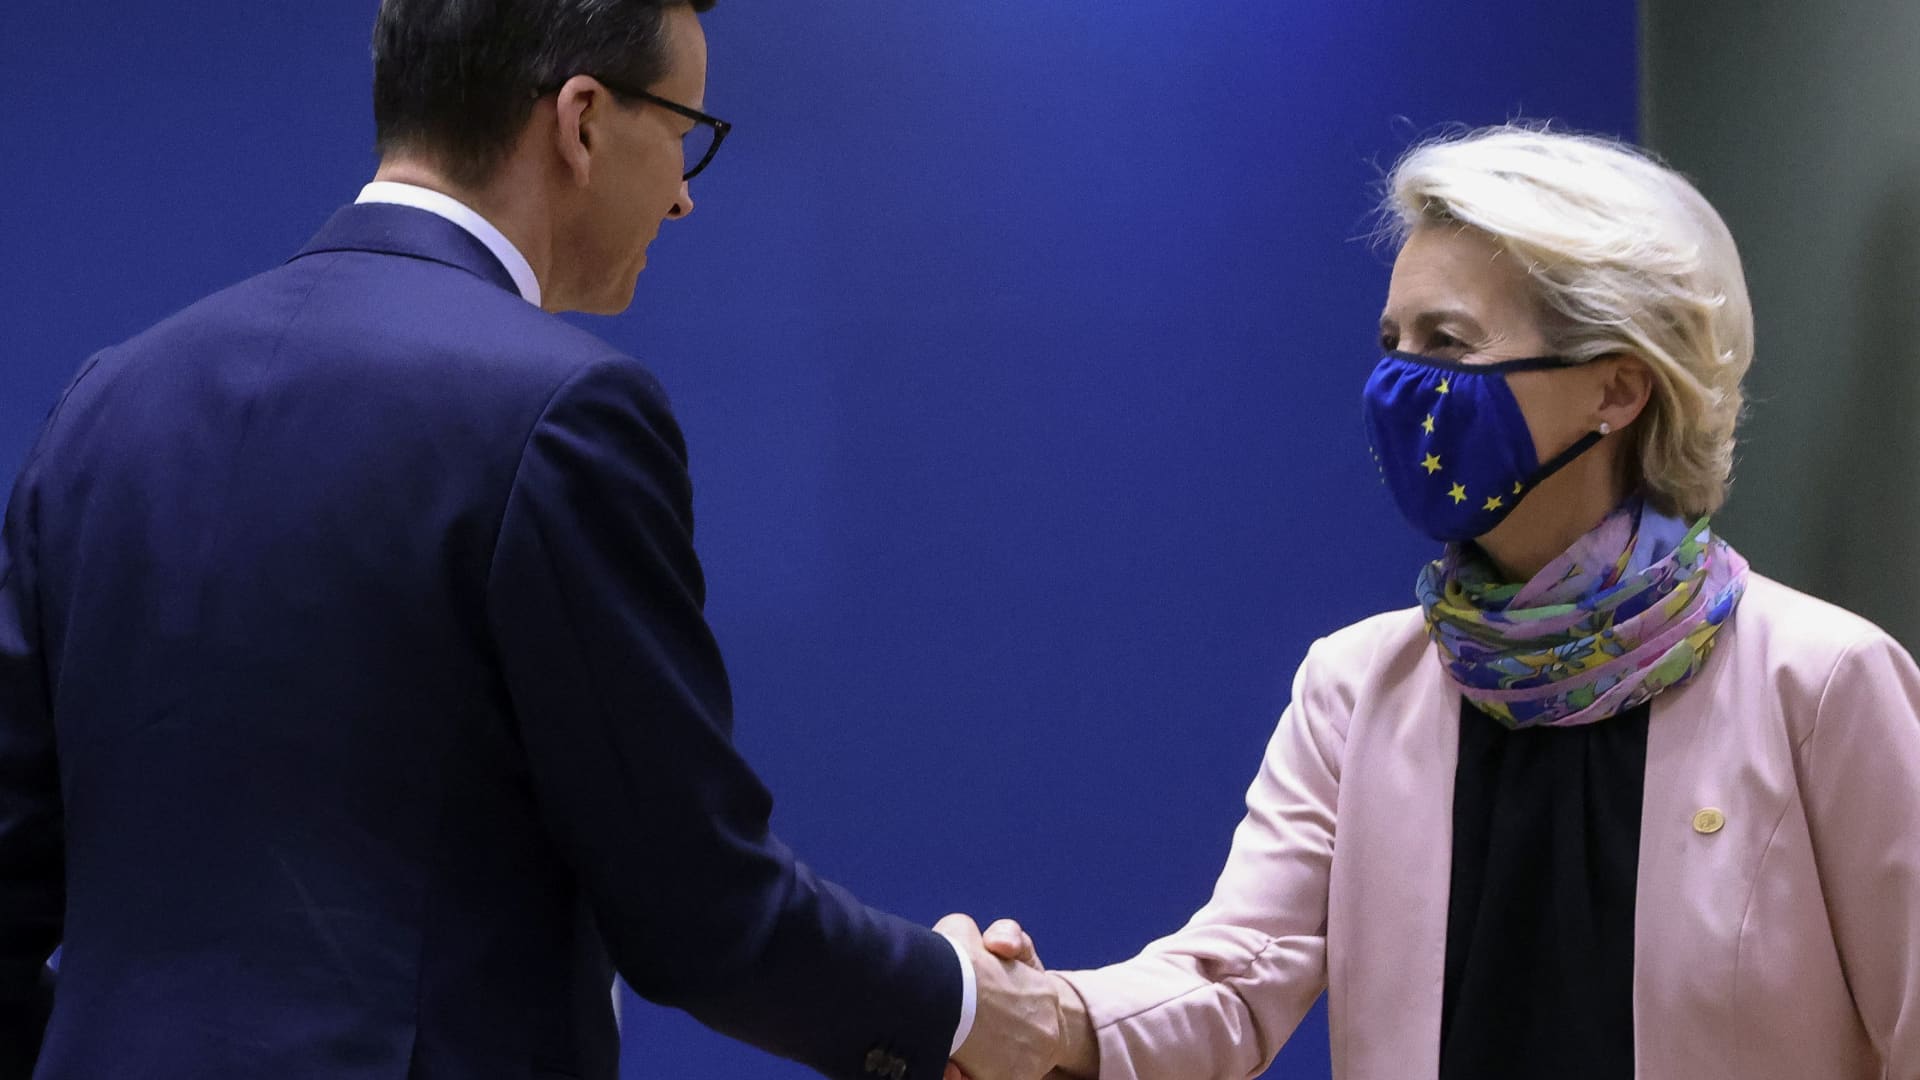 Poland's Prime Minister Mateusz Morawiecki (L) and European Commission President Ursula von der Leyen at the European Council Building in Brussels on October 21, 2021.